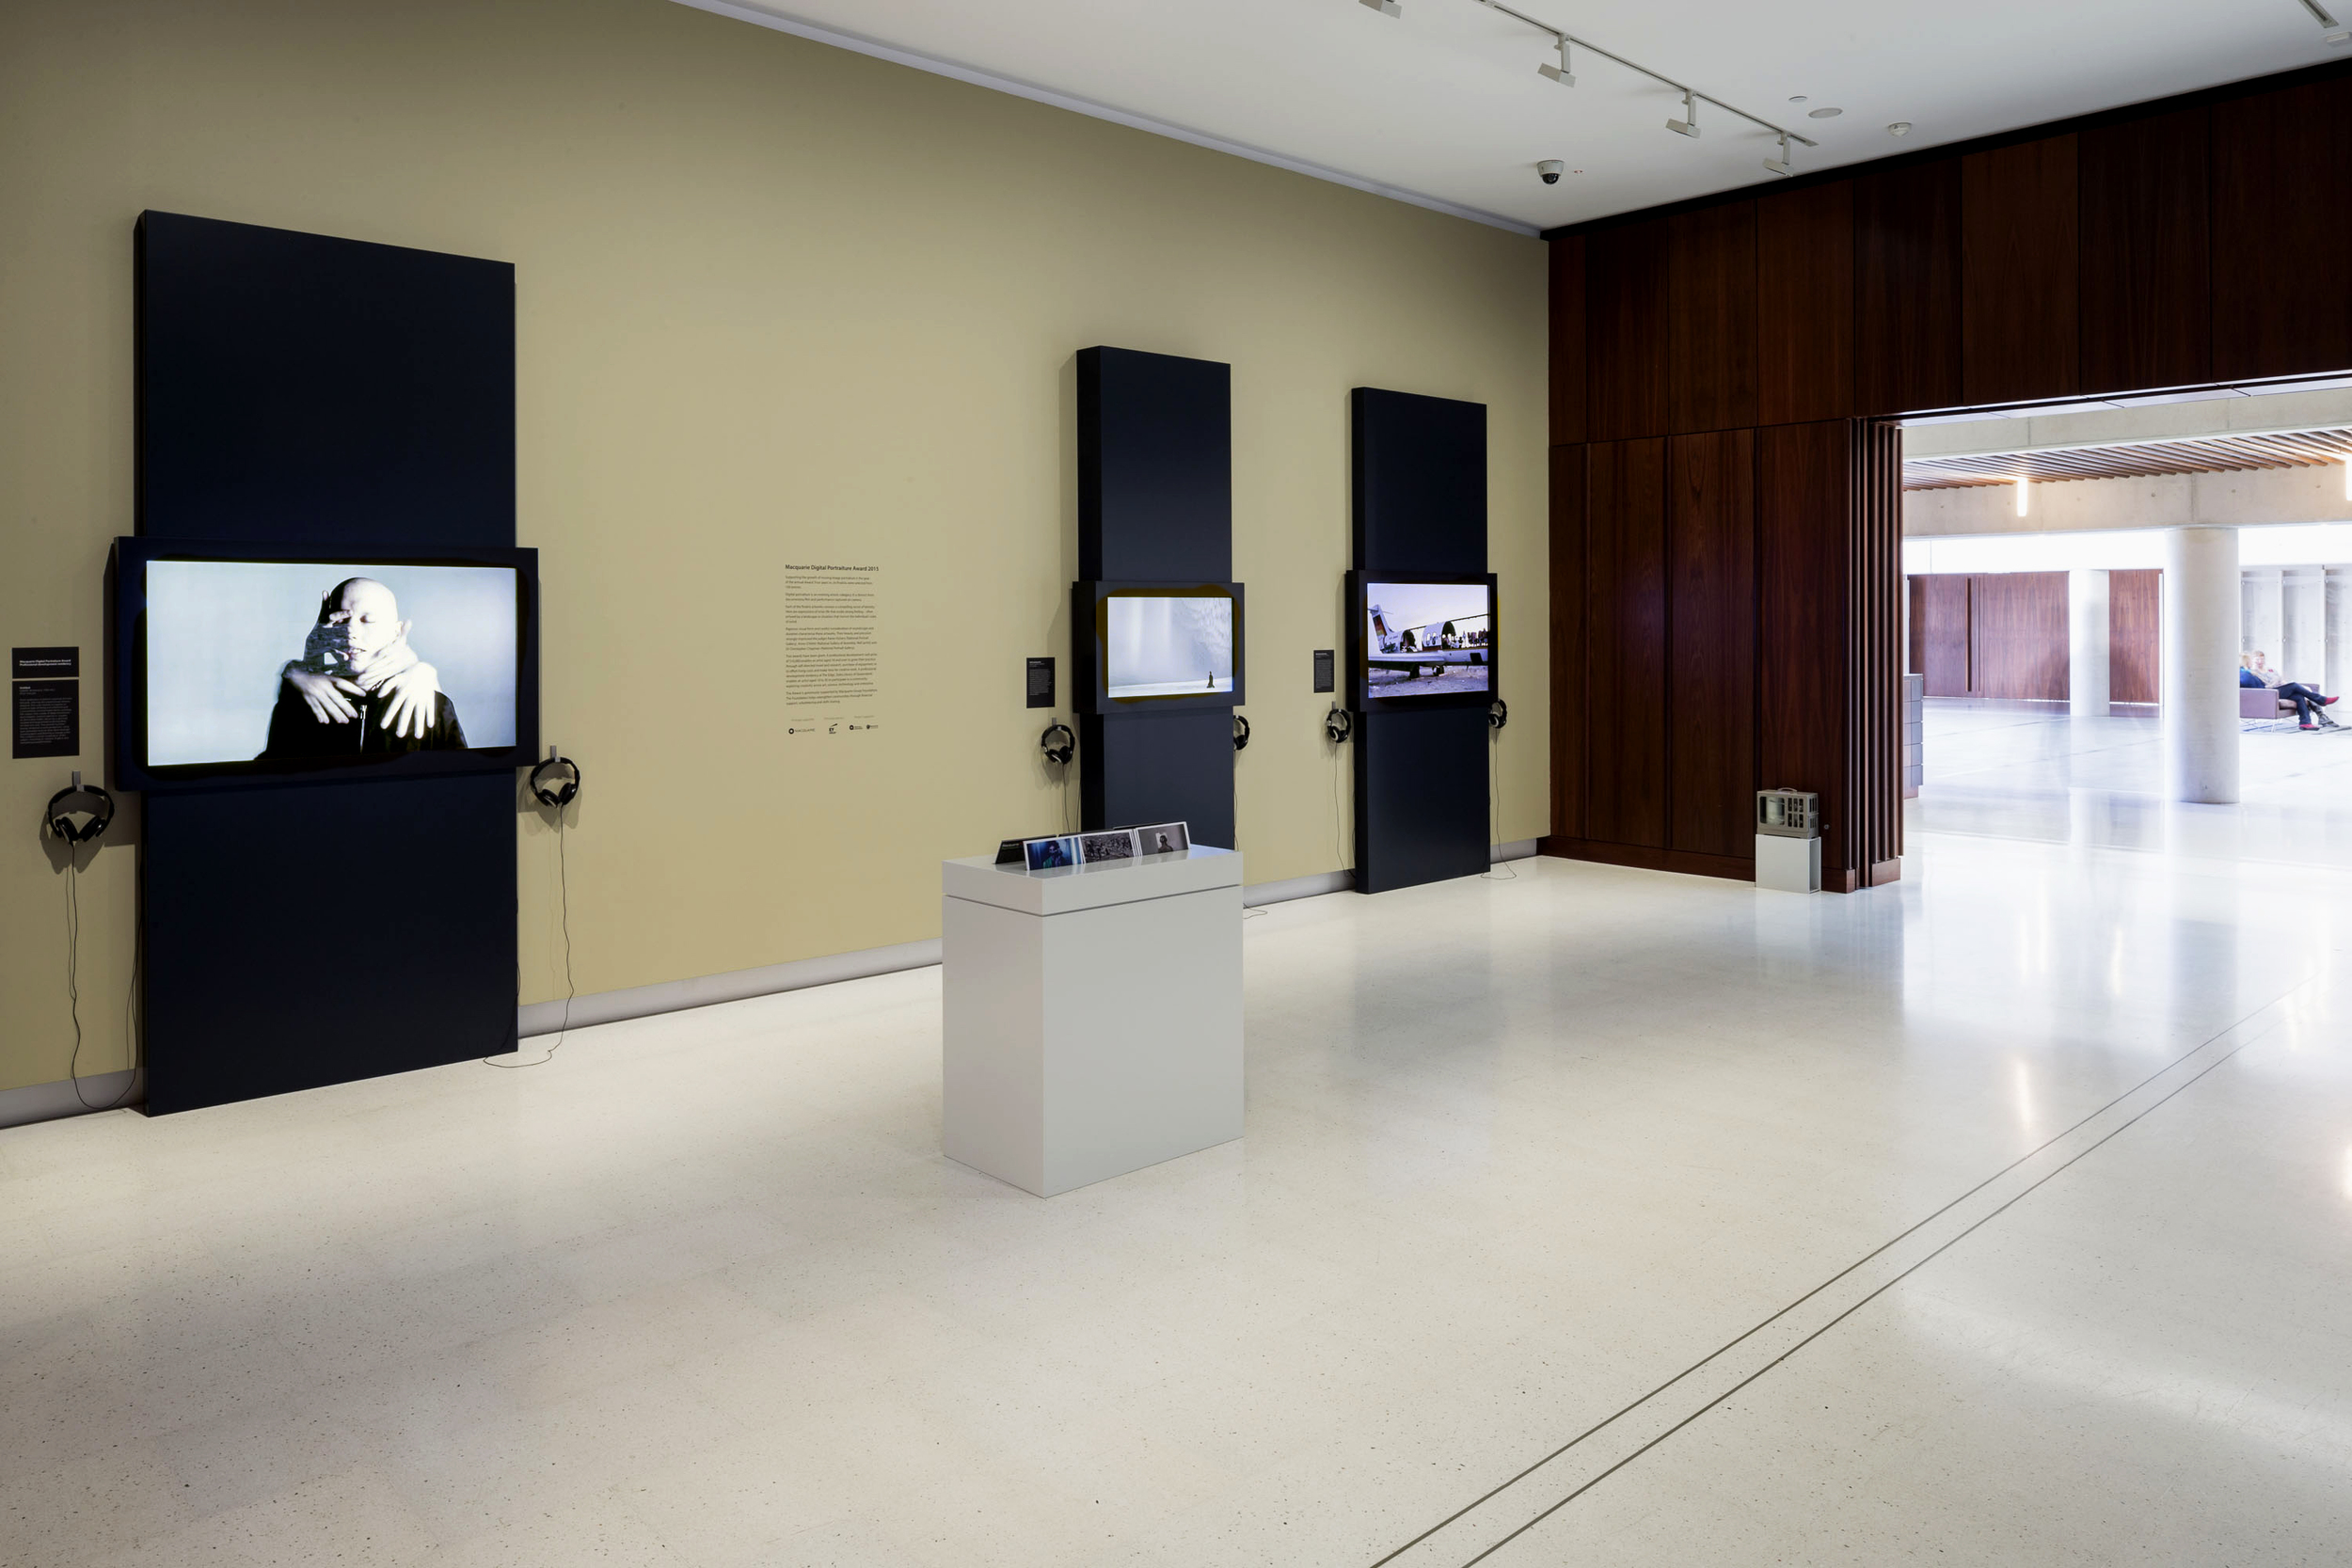  Macquarie Digital Portrait Award 2015 at The National Portrait Gallery, Canberra 